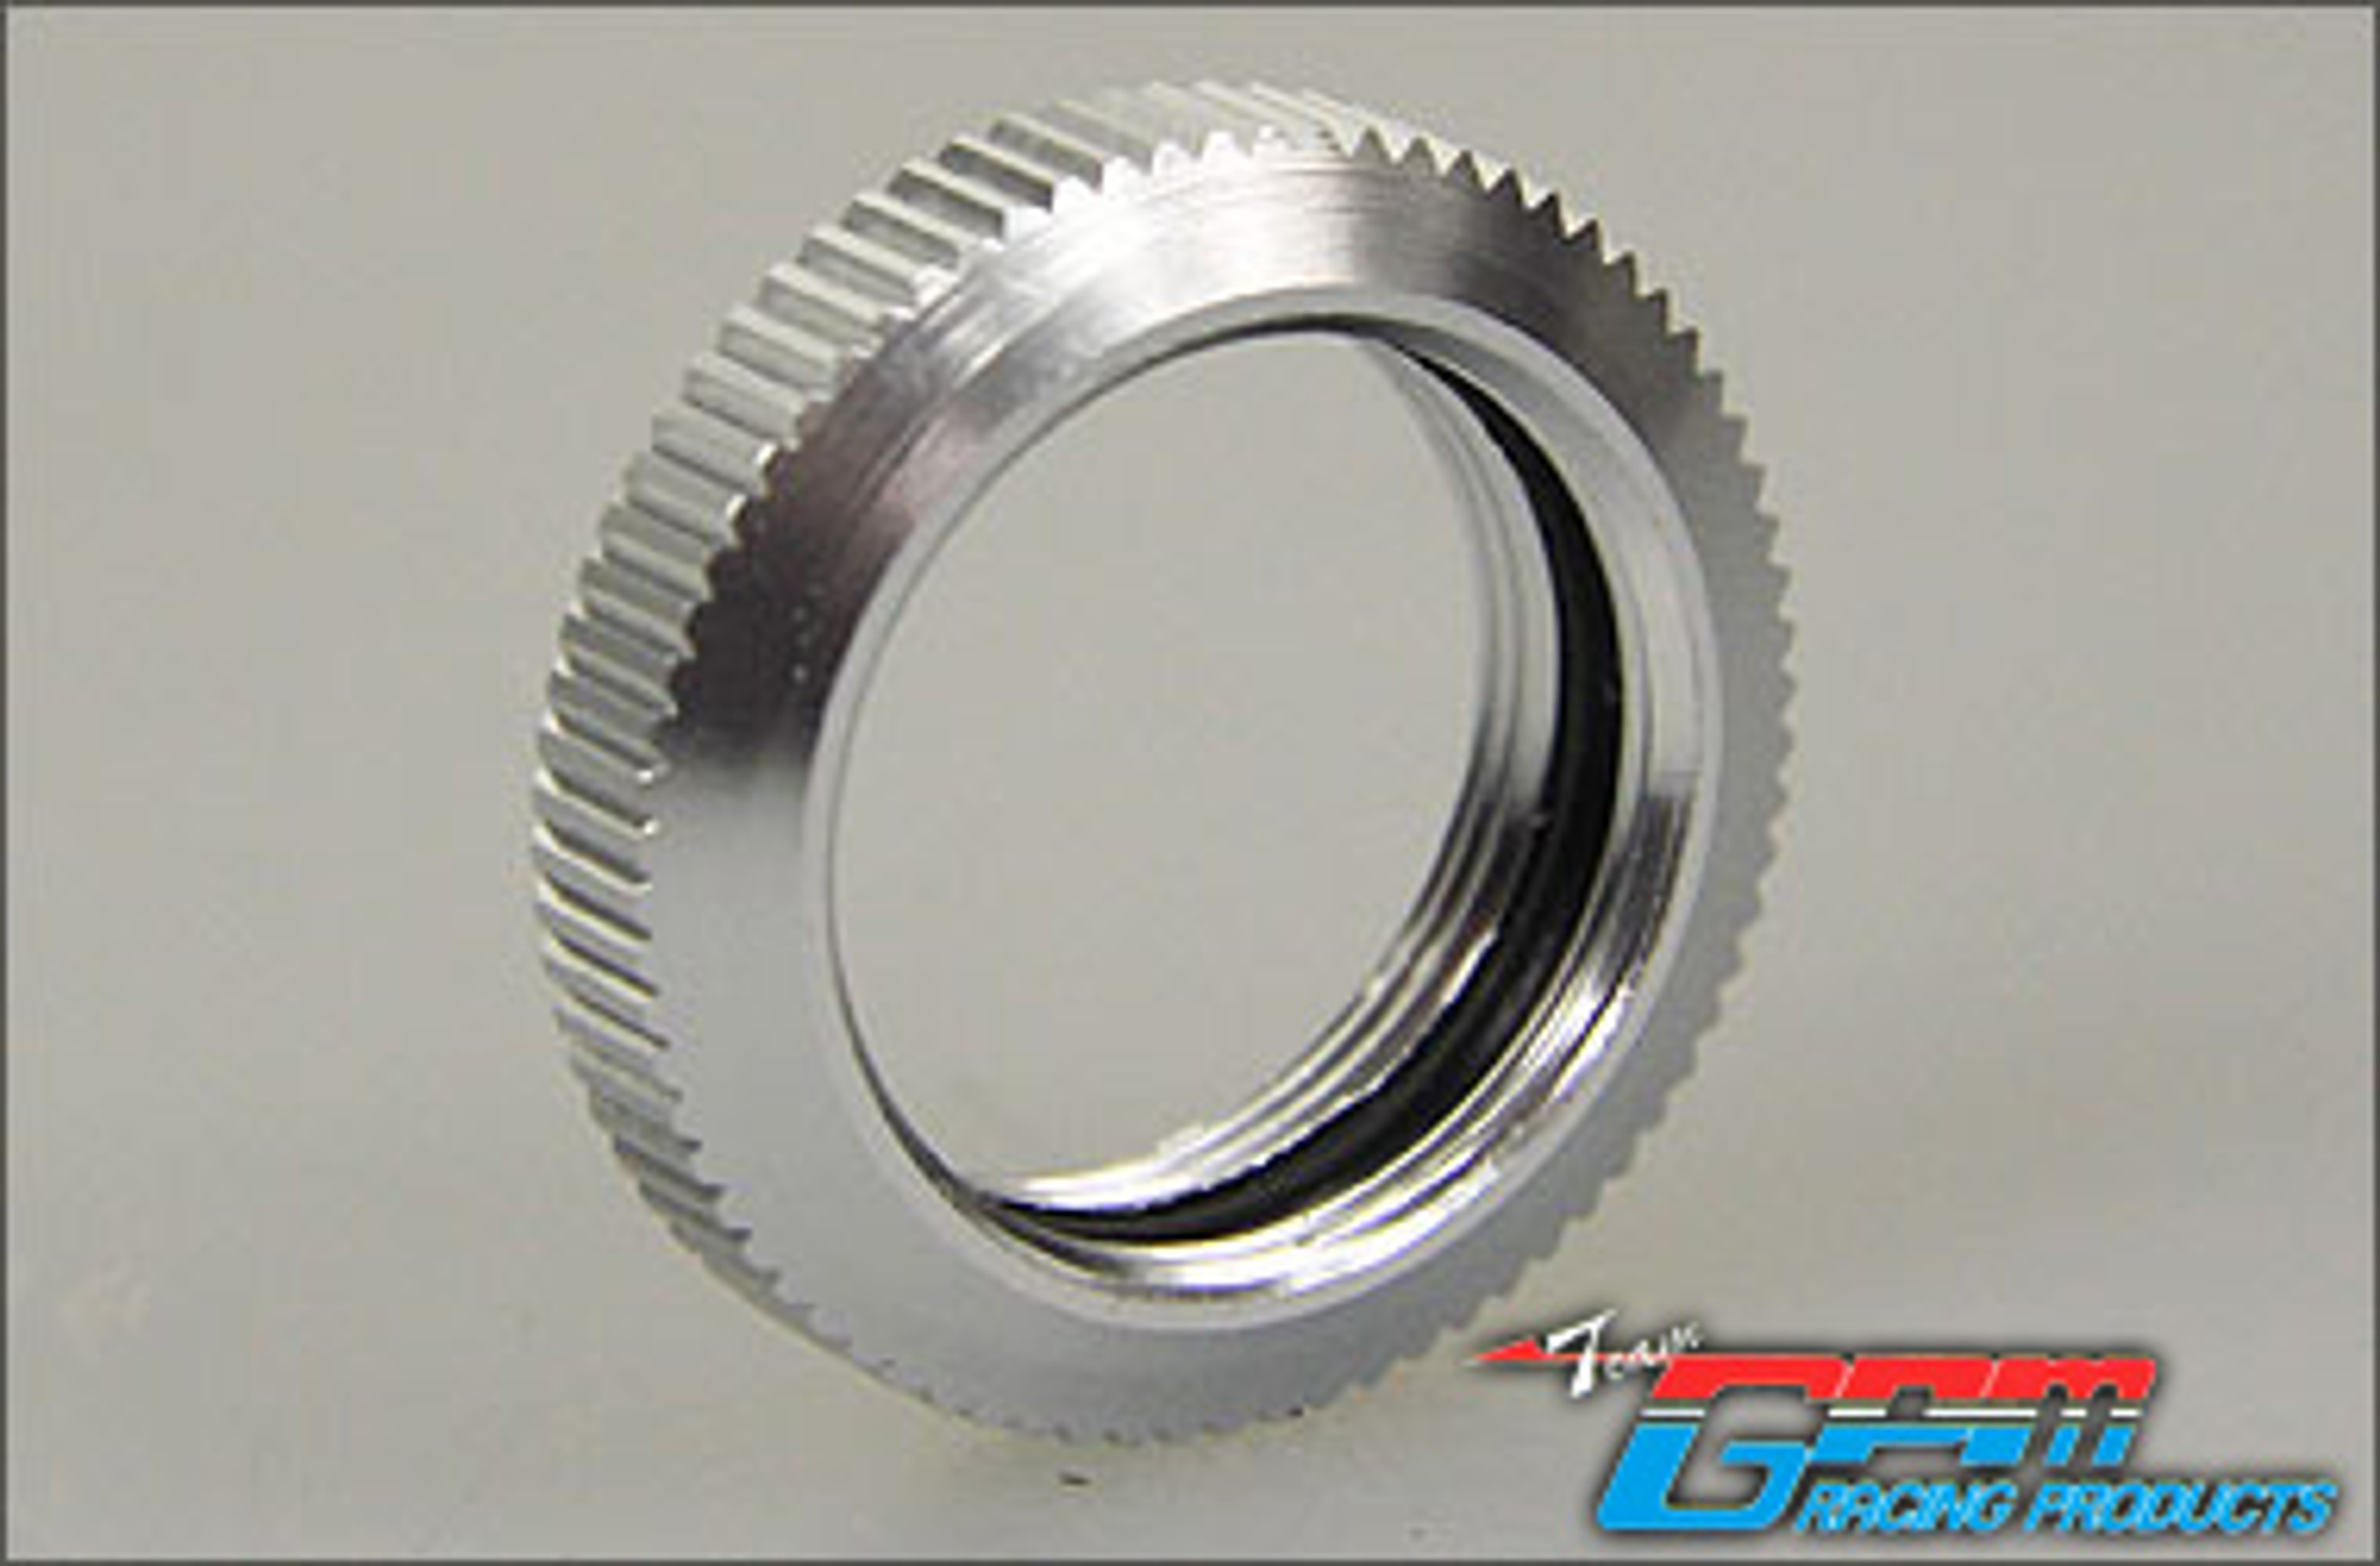 BJ208R/KN Alloy spring tension adjustment nut for GPM Baja, Carson Wild GP Attack shocks, 1 pce.